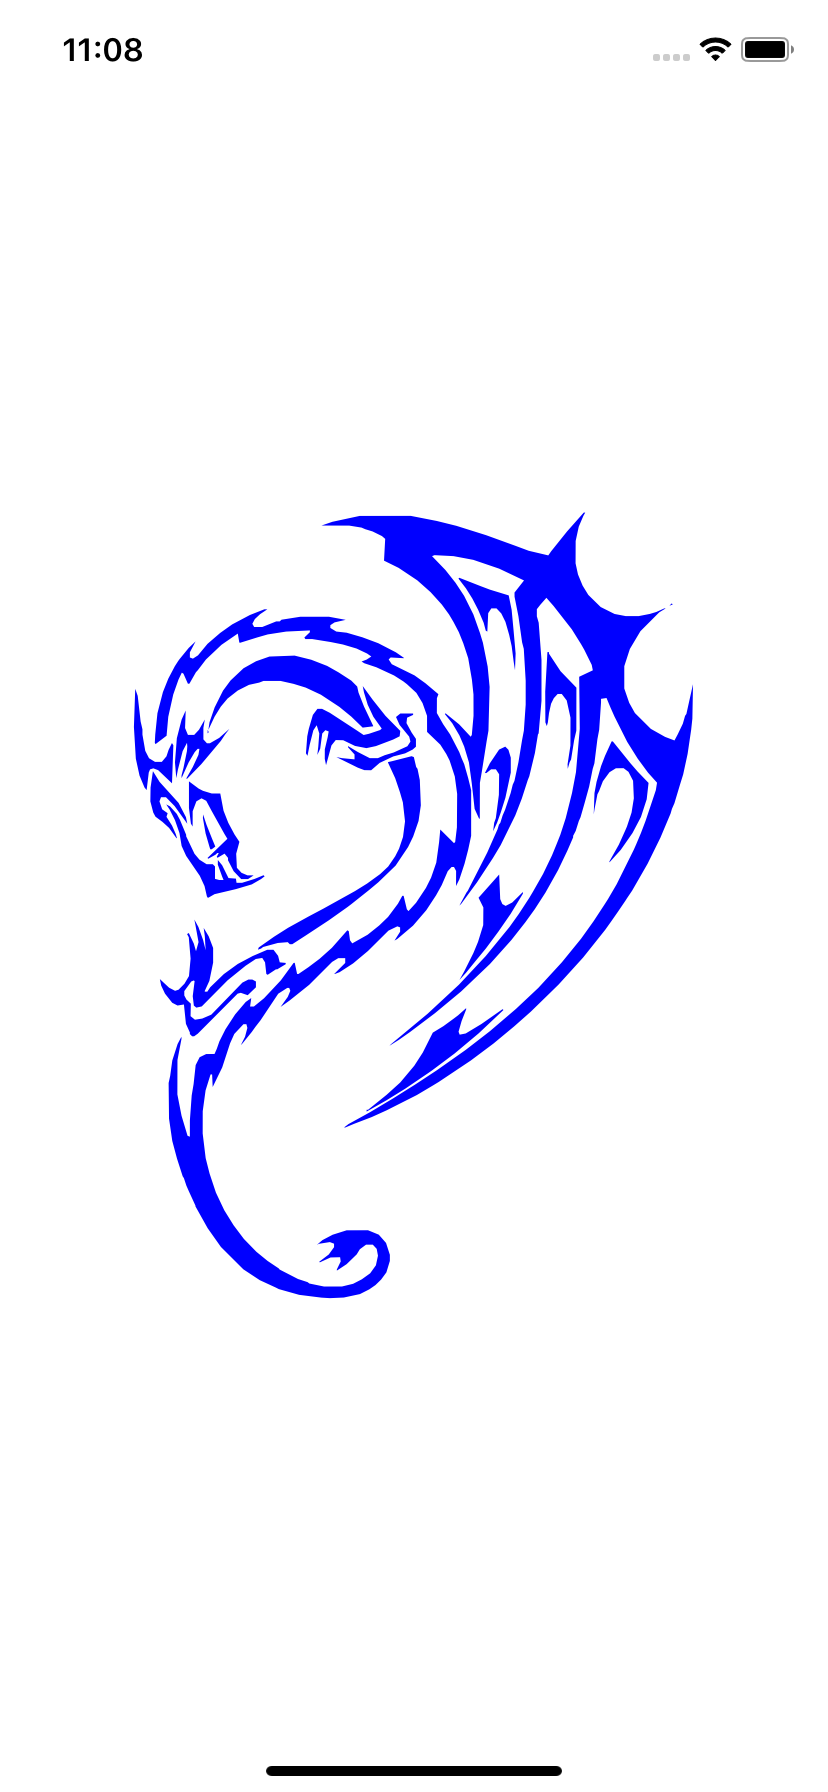 Simulator running our app with our dragon svg file filled with blue